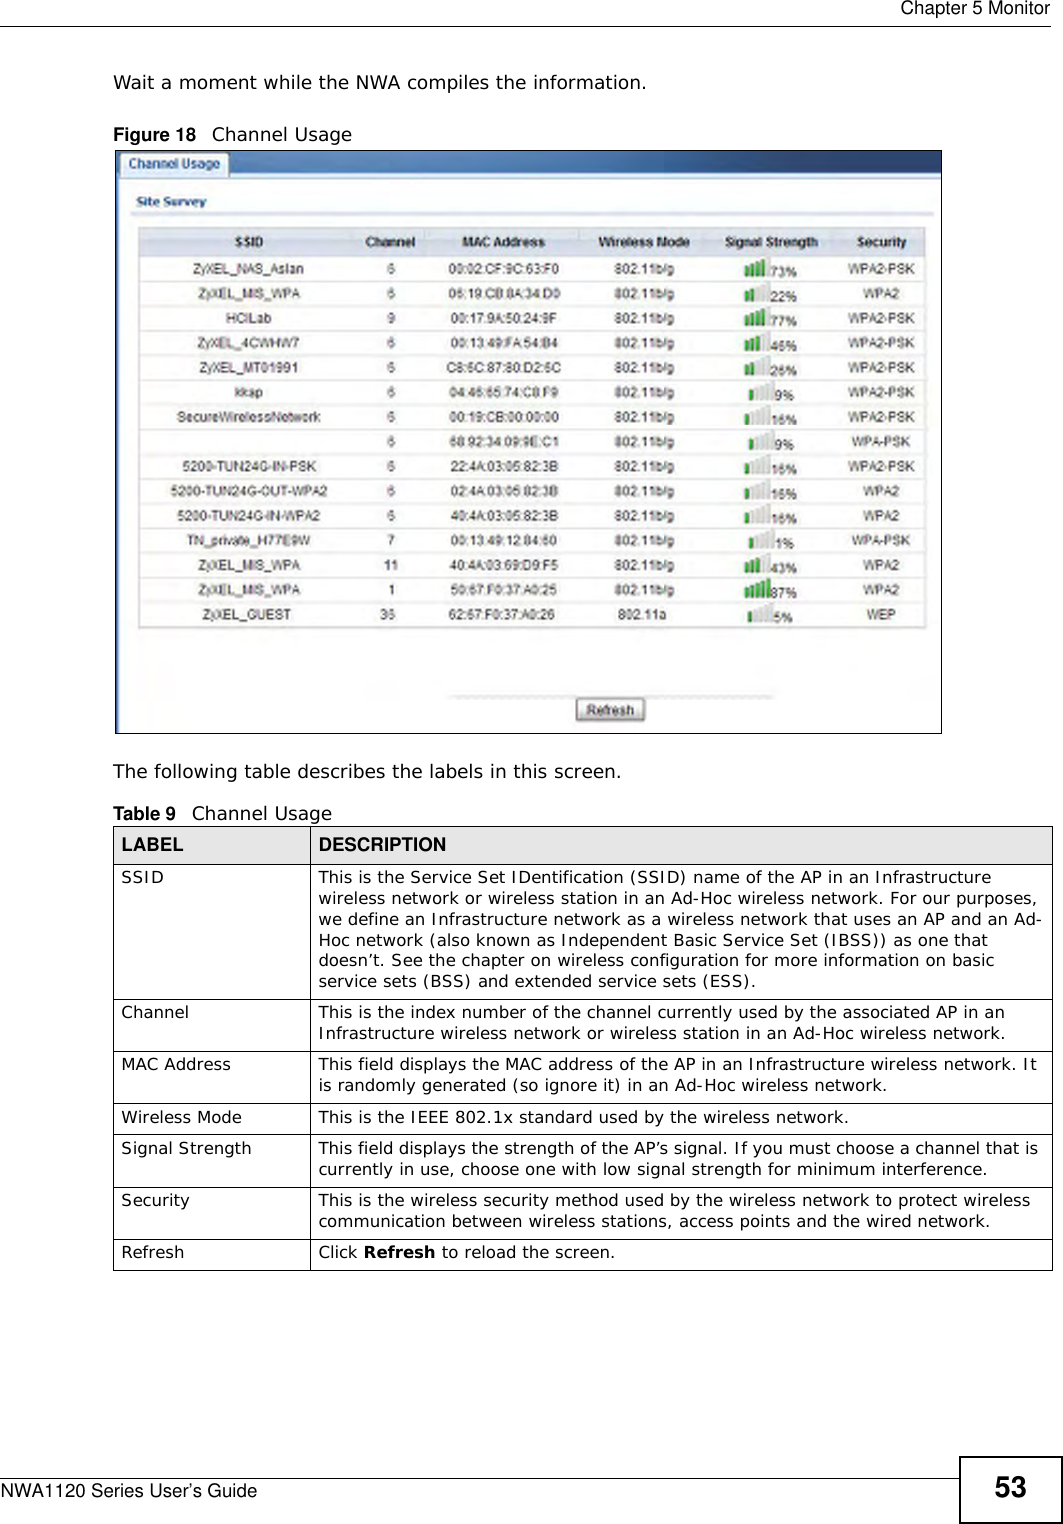  Chapter 5 MonitorNWA1120 Series User’s Guide 53Wait a moment while the NWA compiles the information.Figure 18   Channel Usage The following table describes the labels in this screen.Table 9   Channel UsageLABEL DESCRIPTIONSSID This is the Service Set IDentification (SSID) name of the AP in an Infrastructure wireless network or wireless station in an Ad-Hoc wireless network. For our purposes, we define an Infrastructure network as a wireless network that uses an AP and an Ad-Hoc network (also known as Independent Basic Service Set (IBSS)) as one that doesn’t. See the chapter on wireless configuration for more information on basic service sets (BSS) and extended service sets (ESS).Channel This is the index number of the channel currently used by the associated AP in an Infrastructure wireless network or wireless station in an Ad-Hoc wireless network.MAC Address This field displays the MAC address of the AP in an Infrastructure wireless network. It is randomly generated (so ignore it) in an Ad-Hoc wireless network.Wireless Mode This is the IEEE 802.1x standard used by the wireless network.Signal Strength This field displays the strength of the AP’s signal. If you must choose a channel that is currently in use, choose one with low signal strength for minimum interference.Security This is the wireless security method used by the wireless network to protect wireless communication between wireless stations, access points and the wired network.Refresh Click Refresh to reload the screen.